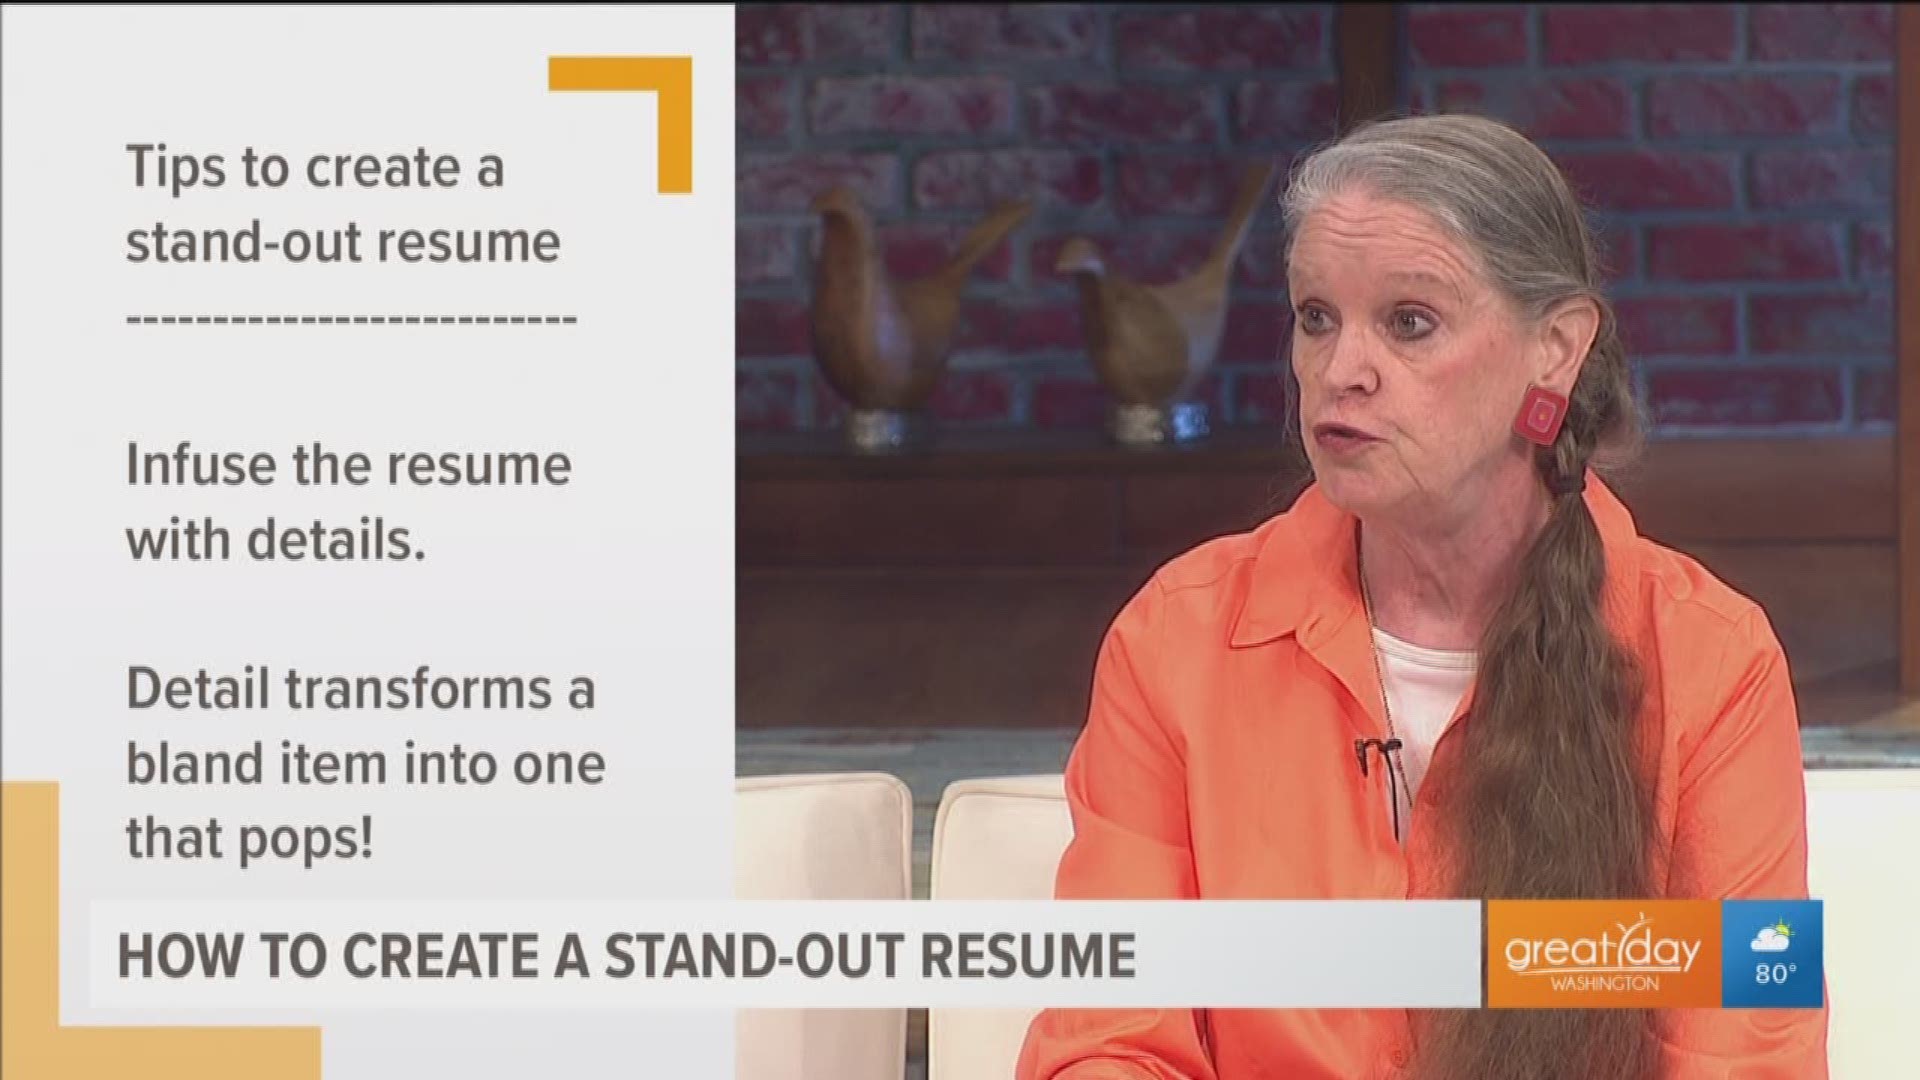 Launch your career with these tips to create a strong resume.  Carla D. Bass, Colonel, Air Force (Ret.) launches the second edition of the book "Write To Influence" coming soon to Amazon.